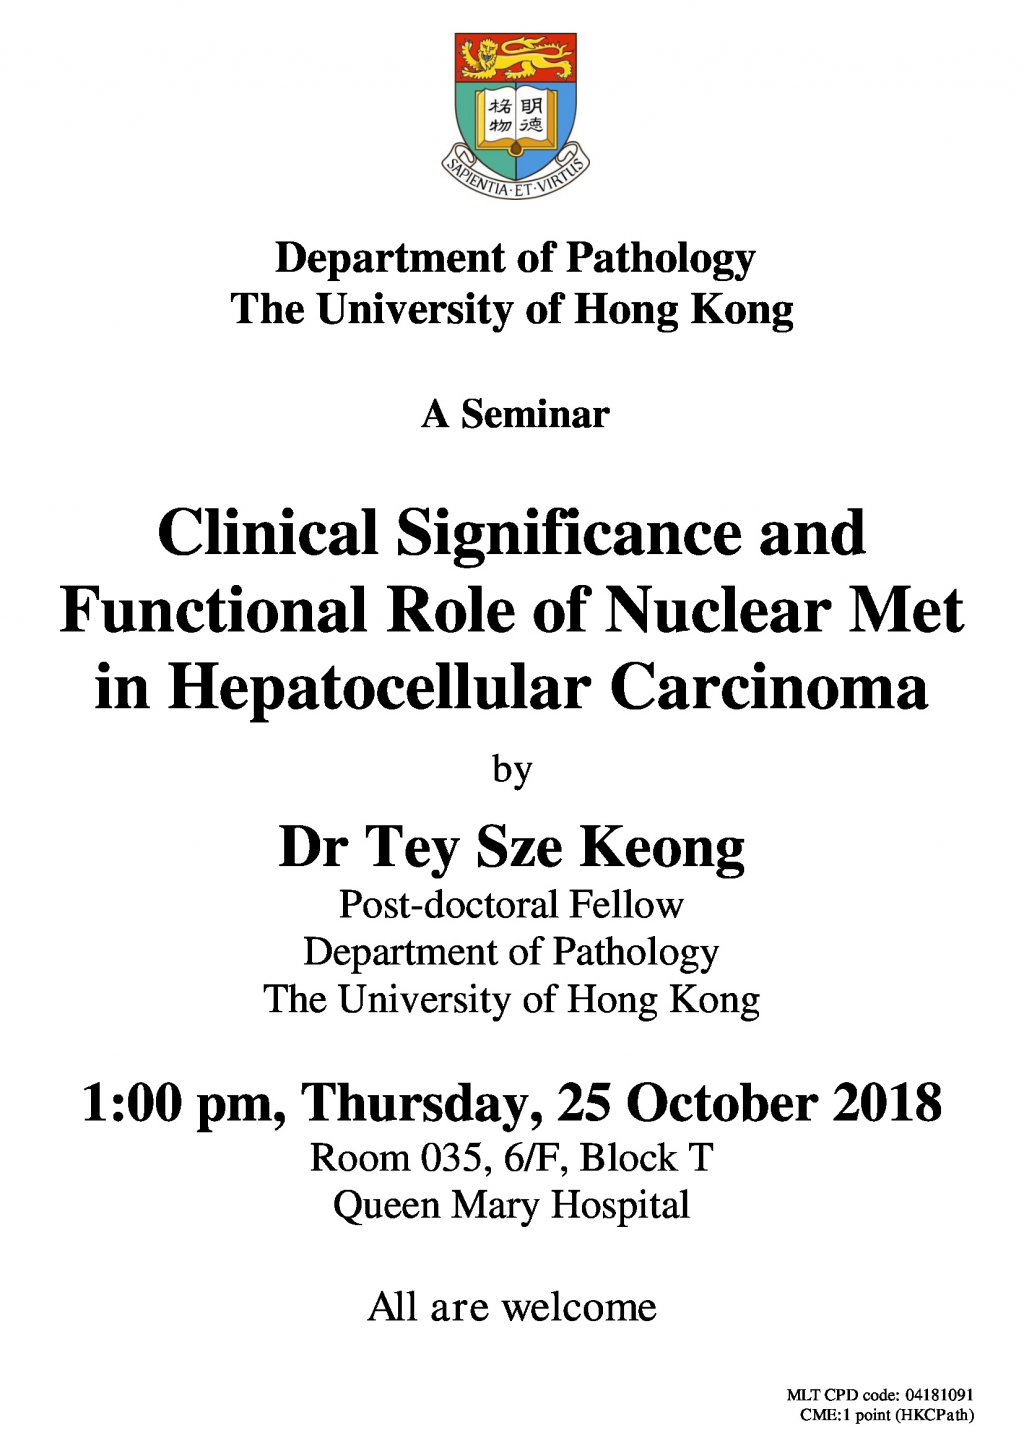 A Seminar by Dr Tey Sze Keong on Oct 25 (1 pm)